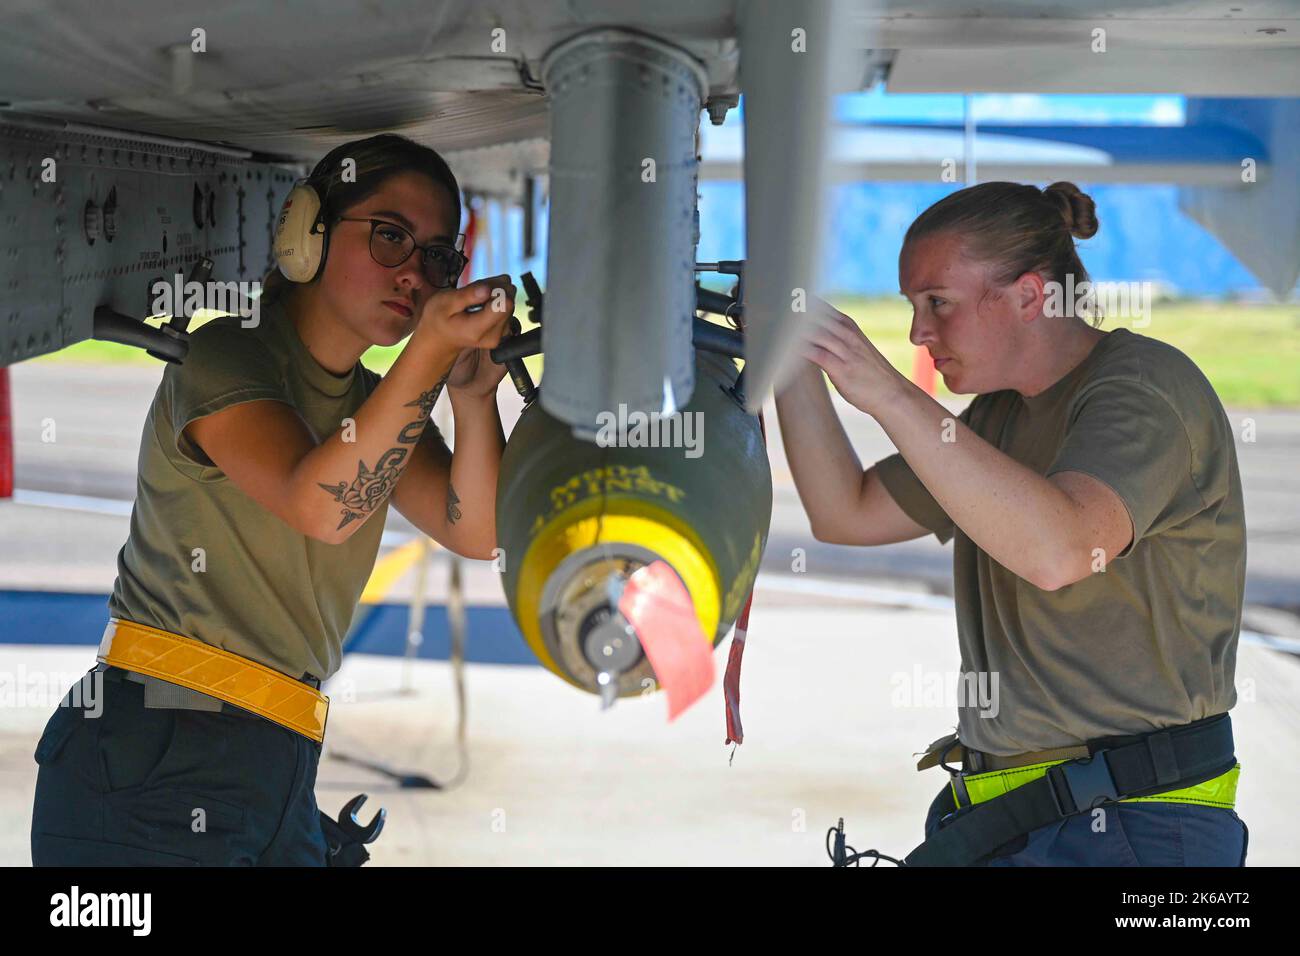 Tucson, Arizona, USA. 13th Sep, 2022. 357th Fighter Generation Squadron weapons armament technicians, Airman 1st Class Zamarys Ramirez and U.S. Air Force Staff Sgt. Bryanna Hendrickson mount an air-to-ground bomb on an A-10 Thunderbolt II at the live ordnance loading area at Davis-Monthan Air Force Base, Arizona, Sept. 13, 2022. These bombs were used as part of continual training for both maintainers and pilots to further their skills in projecting airpower anywhere, anytime. Credit: U.S. Air Force/ZUMA Press Wire Service/ZUMAPRESS.com/Alamy Live News Stock Photo